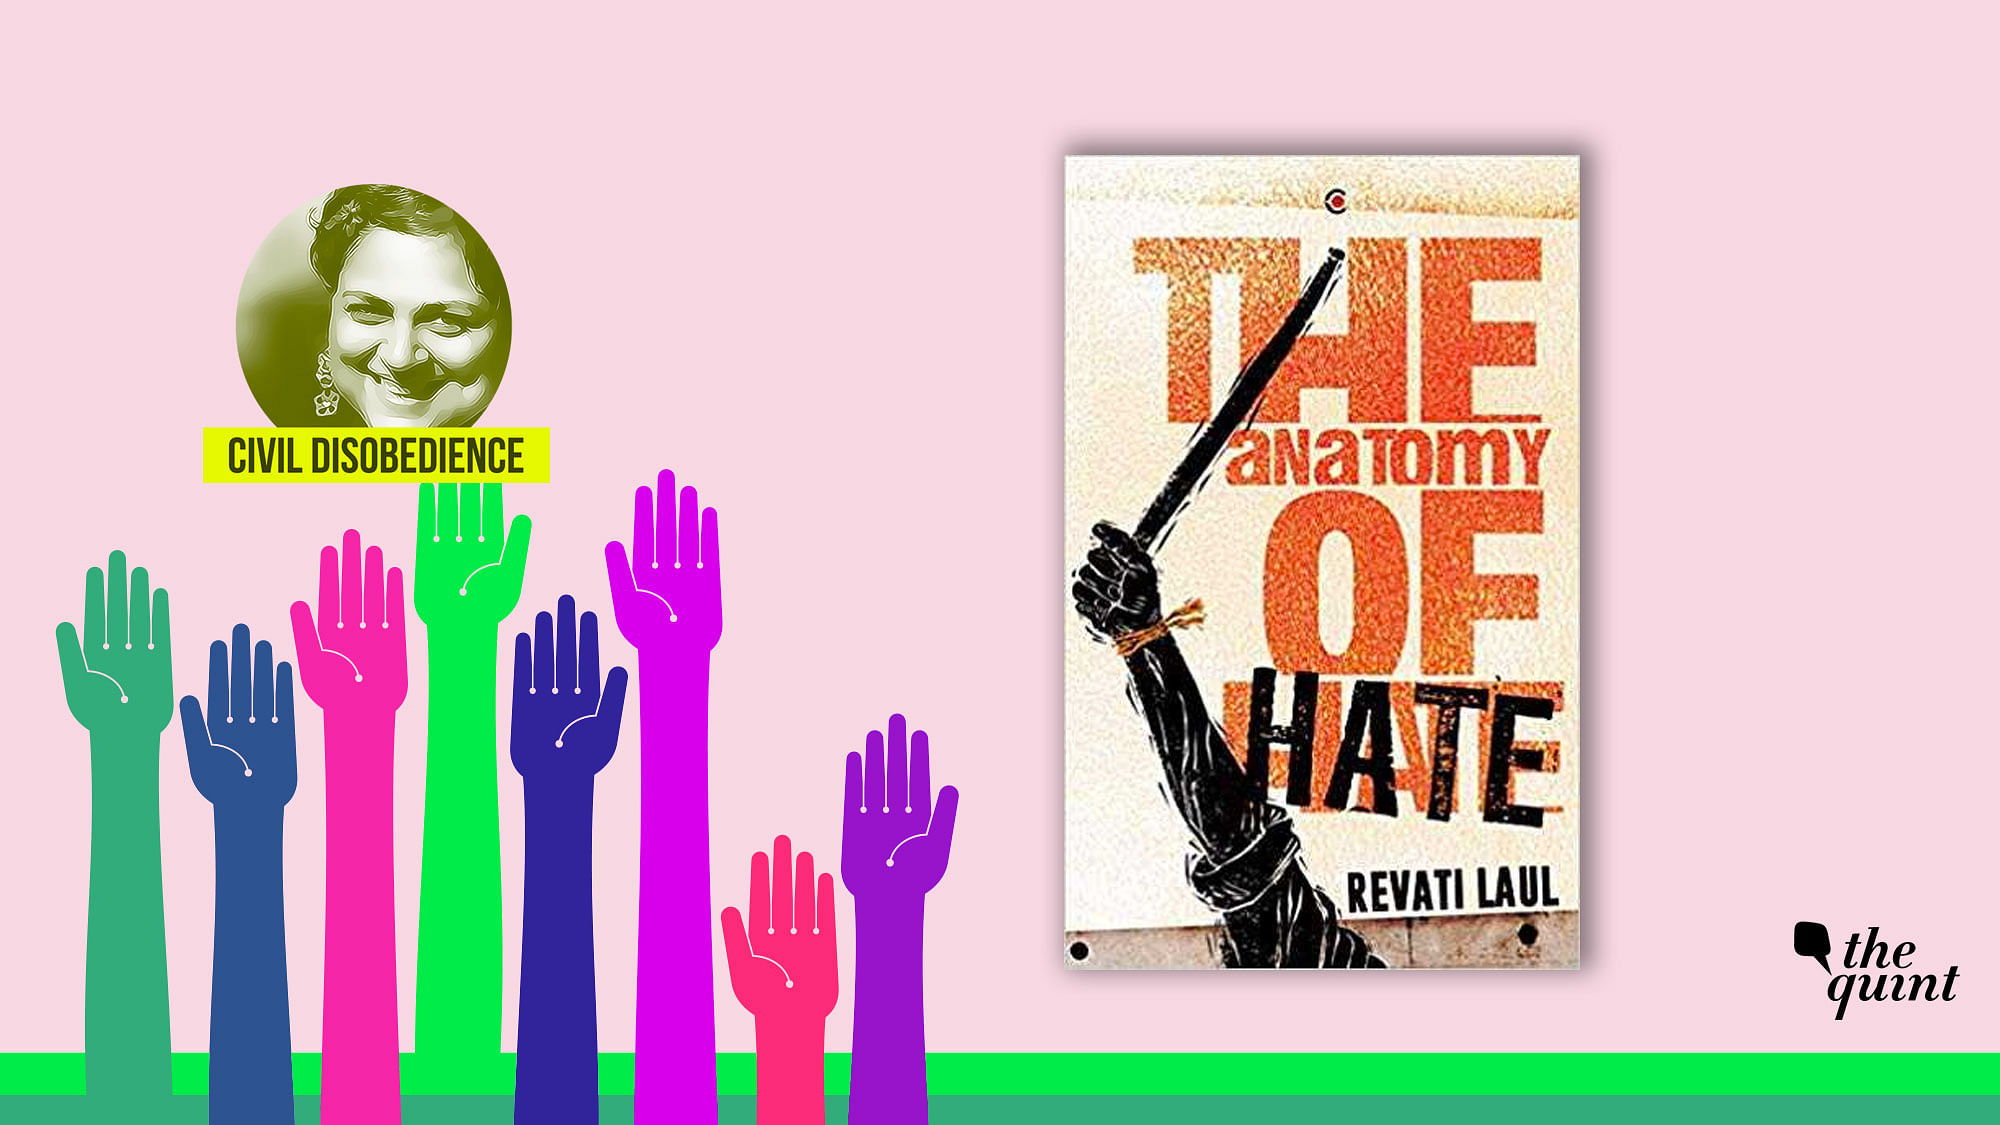 Image used for representation. Revati Laul’s book ‘The Anatomy of Hate’ has been published by Context / Westland.